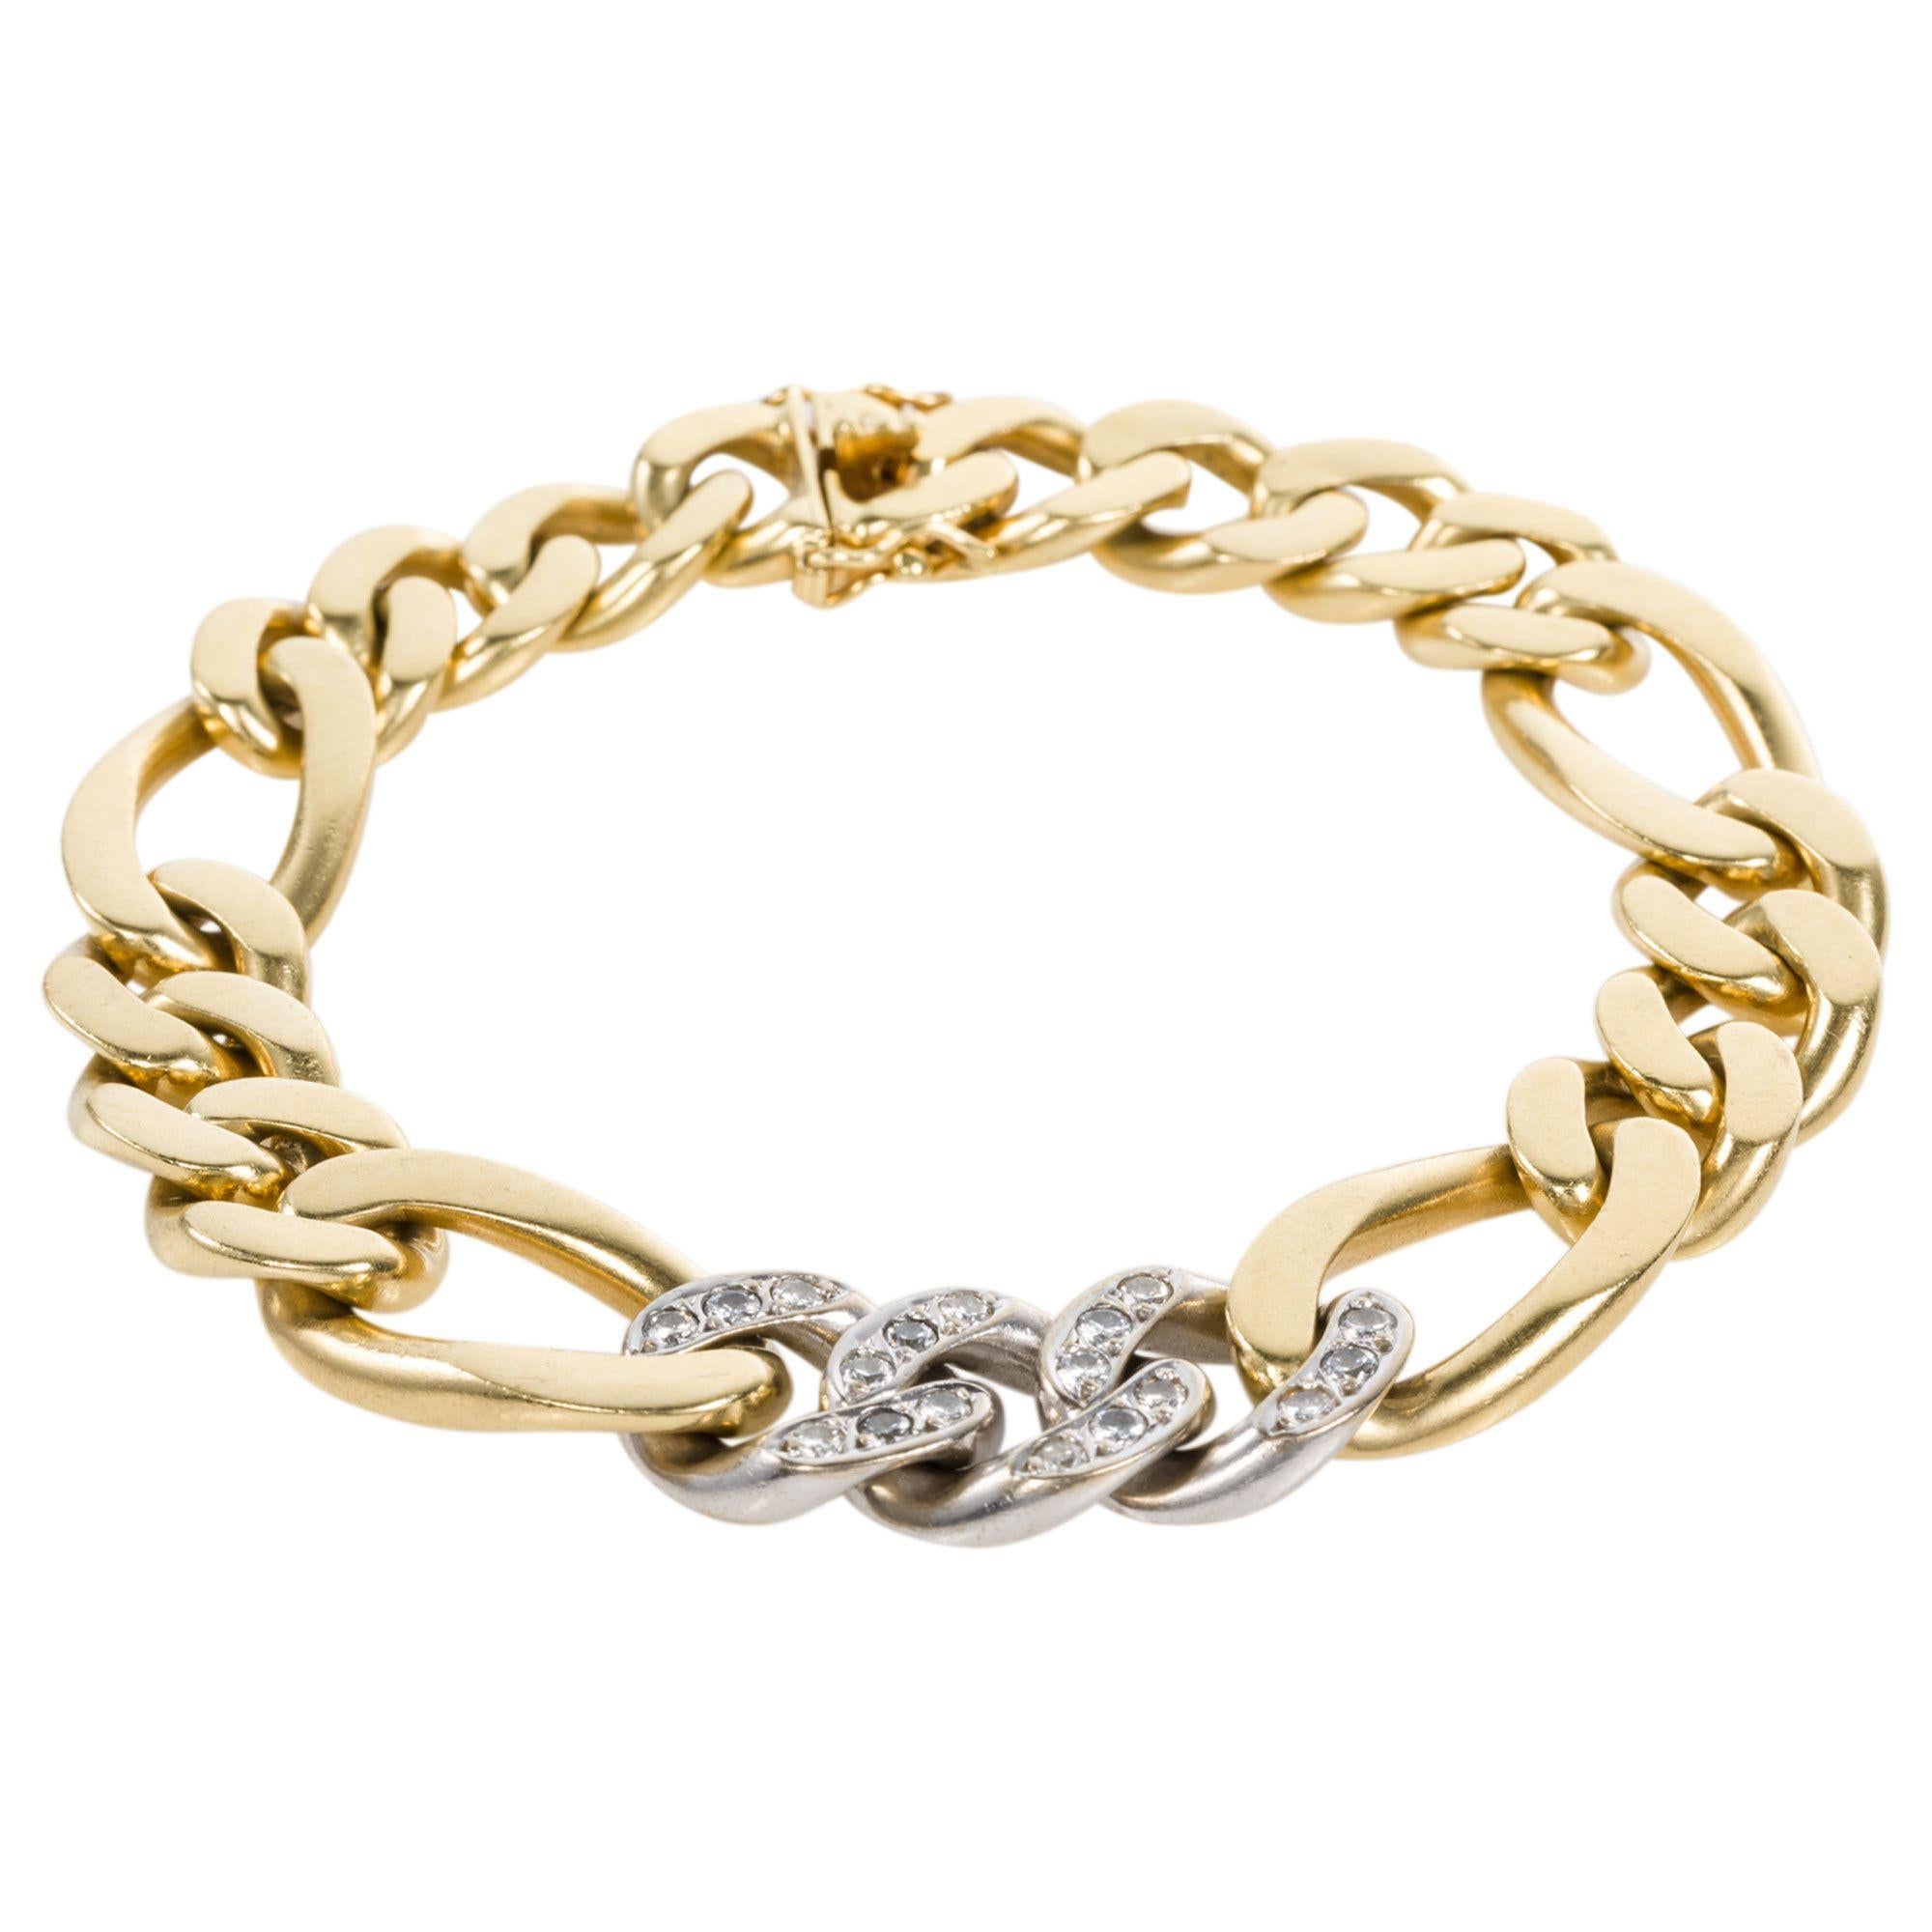 Perfect for the Ladies or Gents - this heavy & solid 18k yellow & white gold curb link bracelet is just the right piece for everyday wear. It will definitely become your signature piece - wear it alone or stack it with other bracelets and bangle.